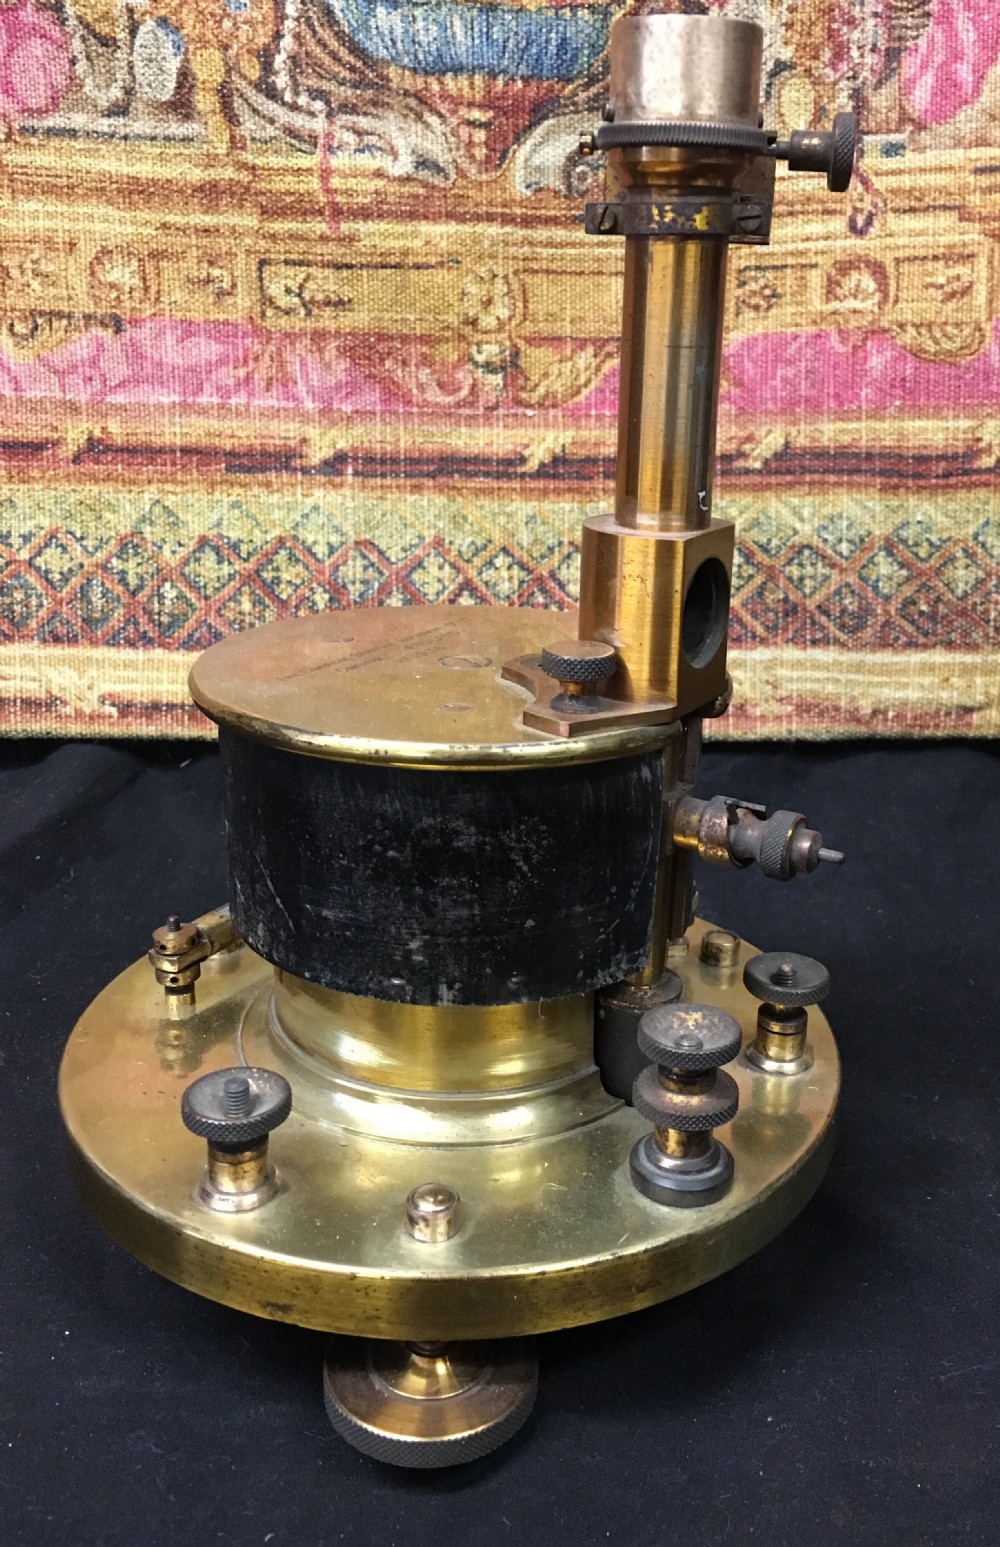 paschen type galvanometer made by the cambridge instrument company limited